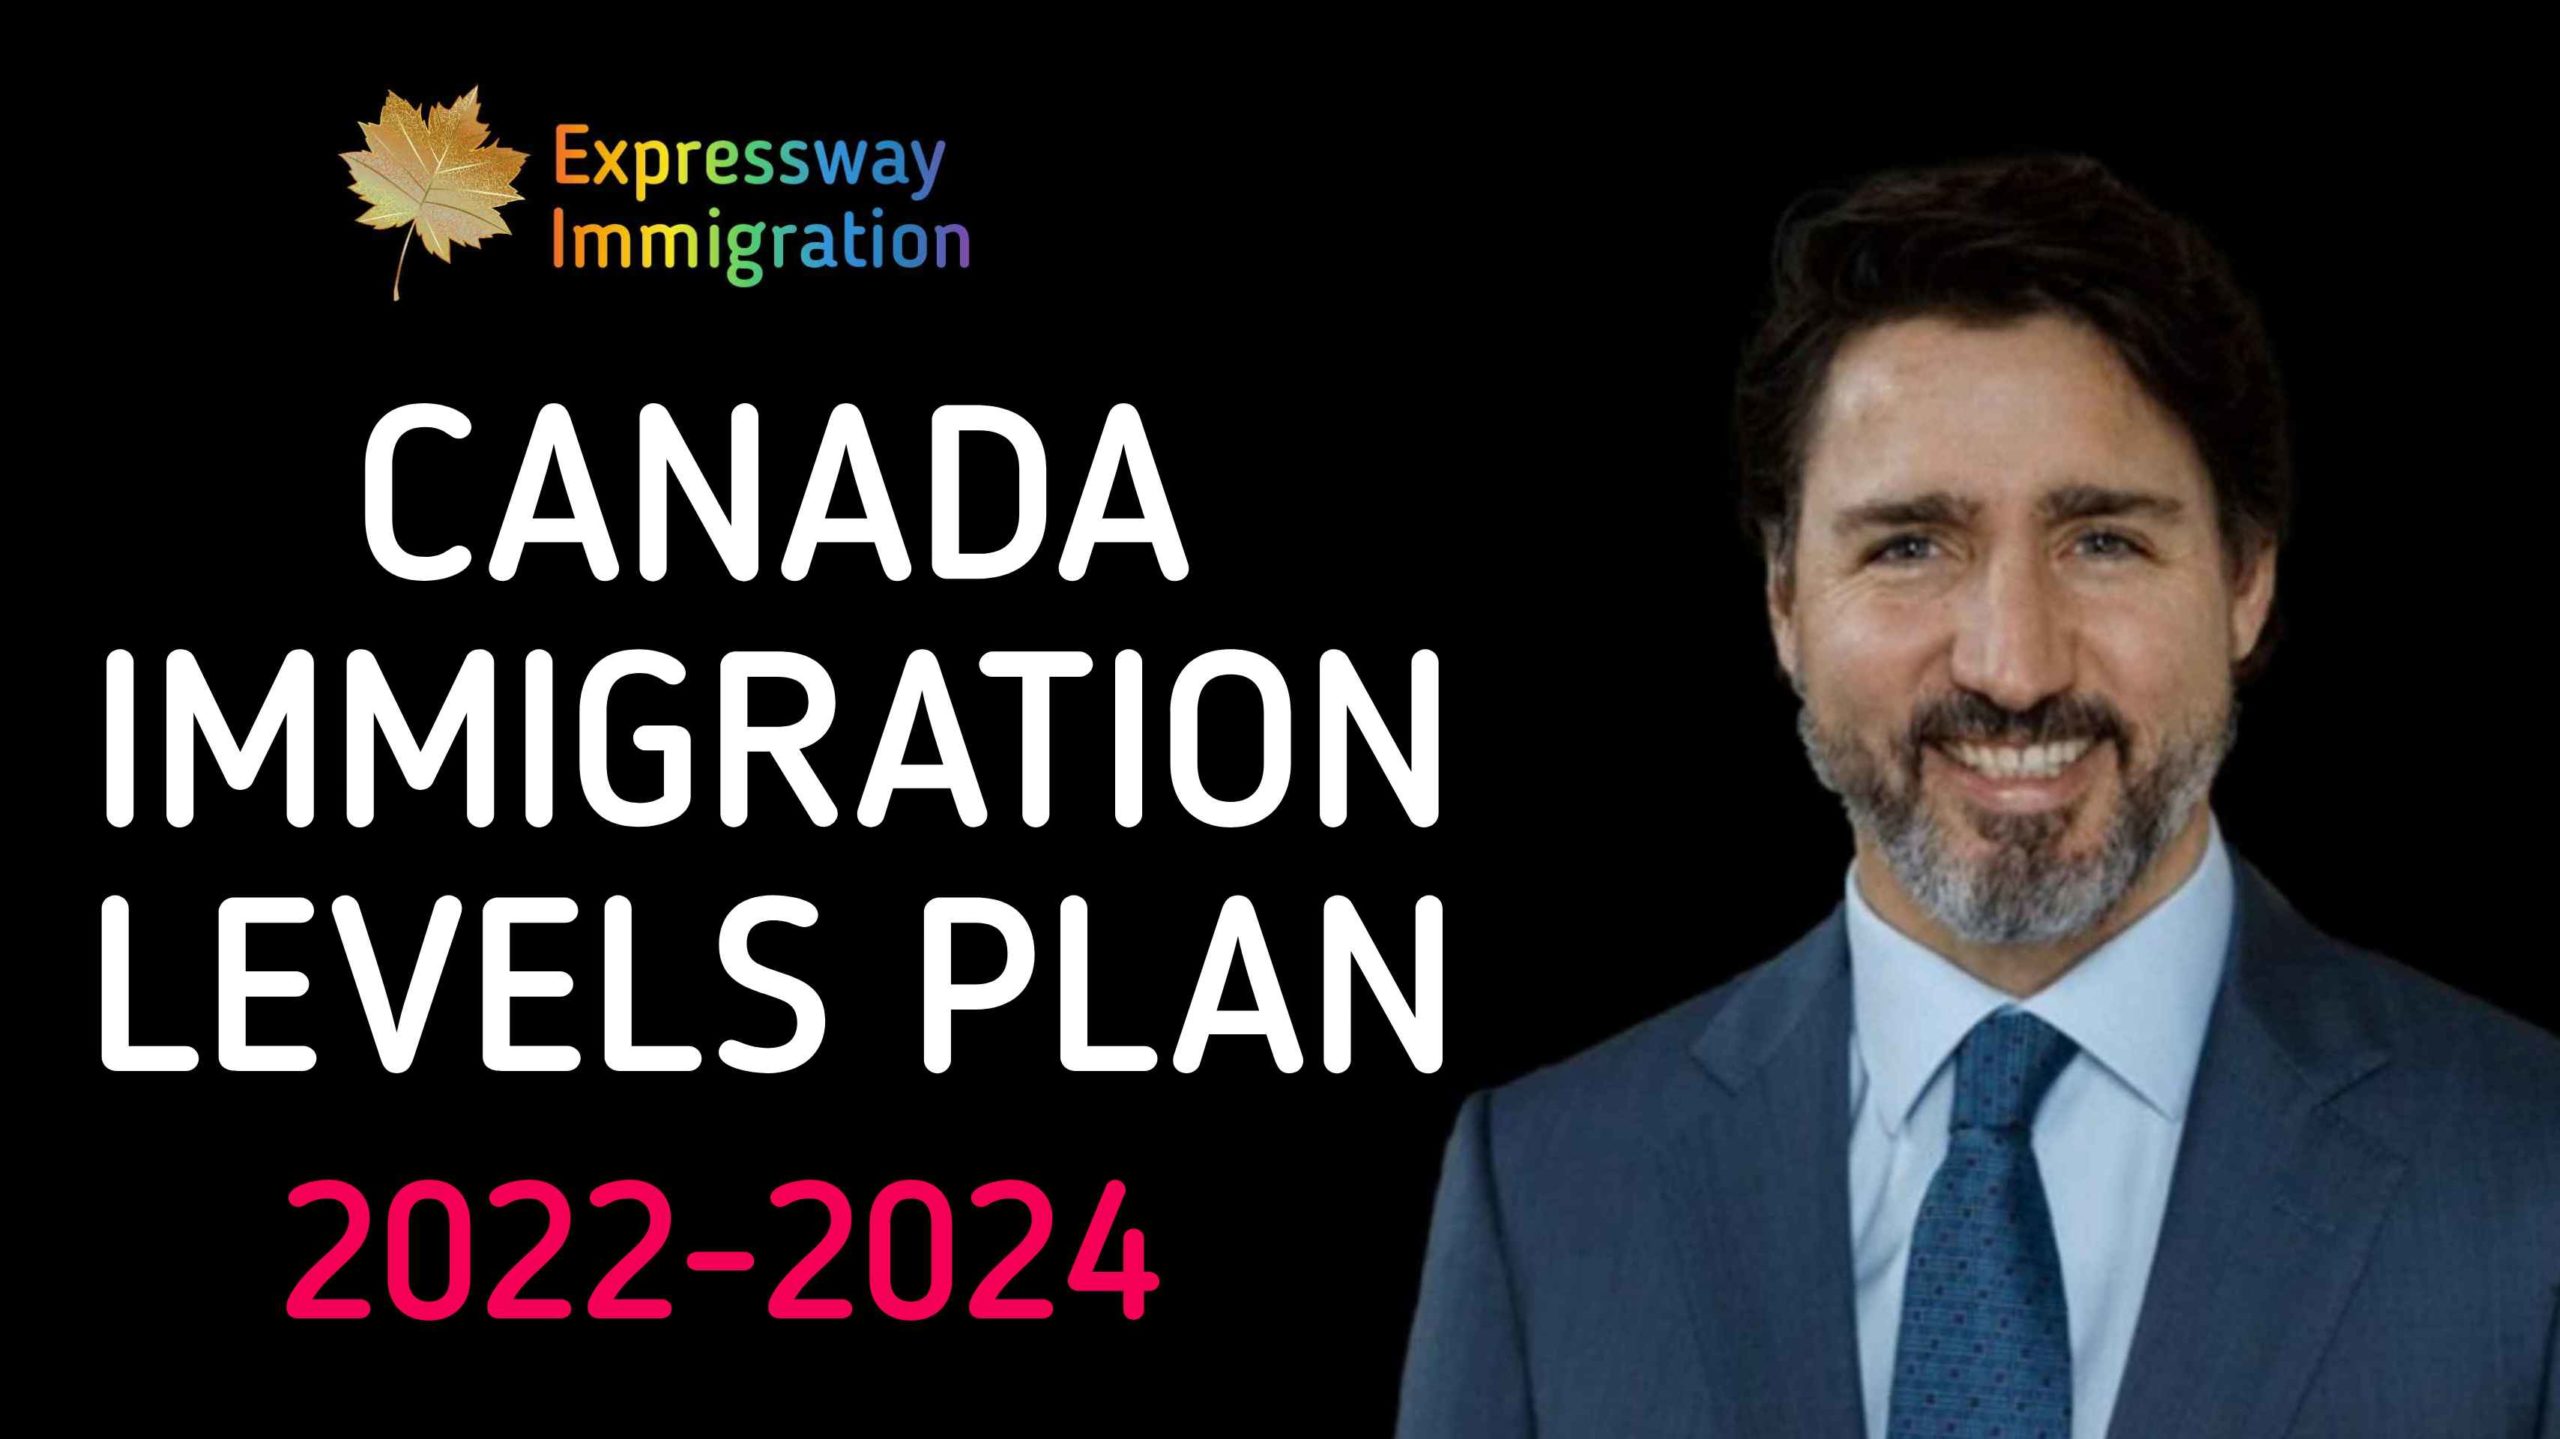 Canada's Immigration Levels Plan 2022-2024